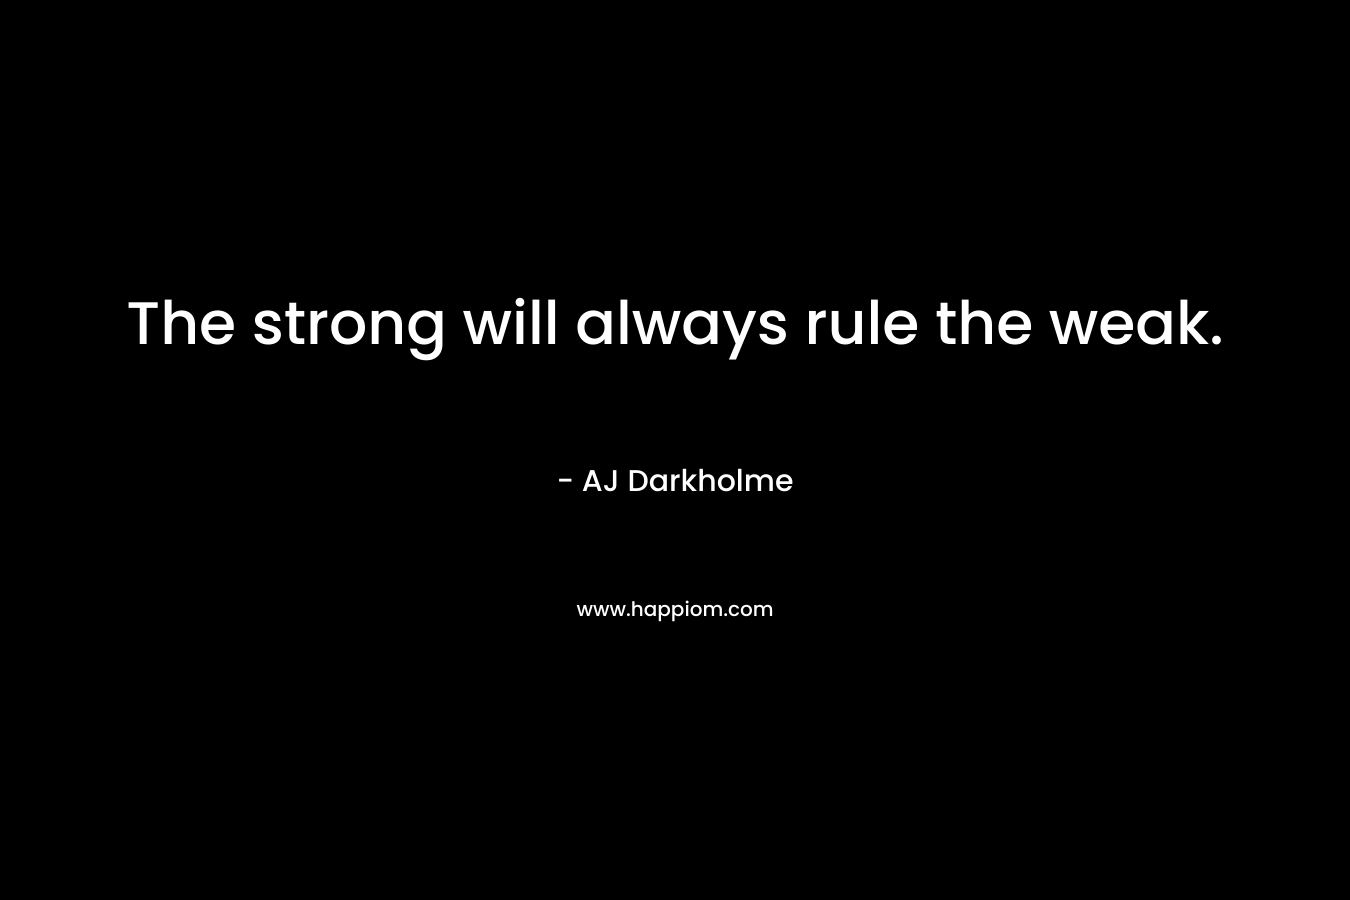 The strong will always rule the weak.